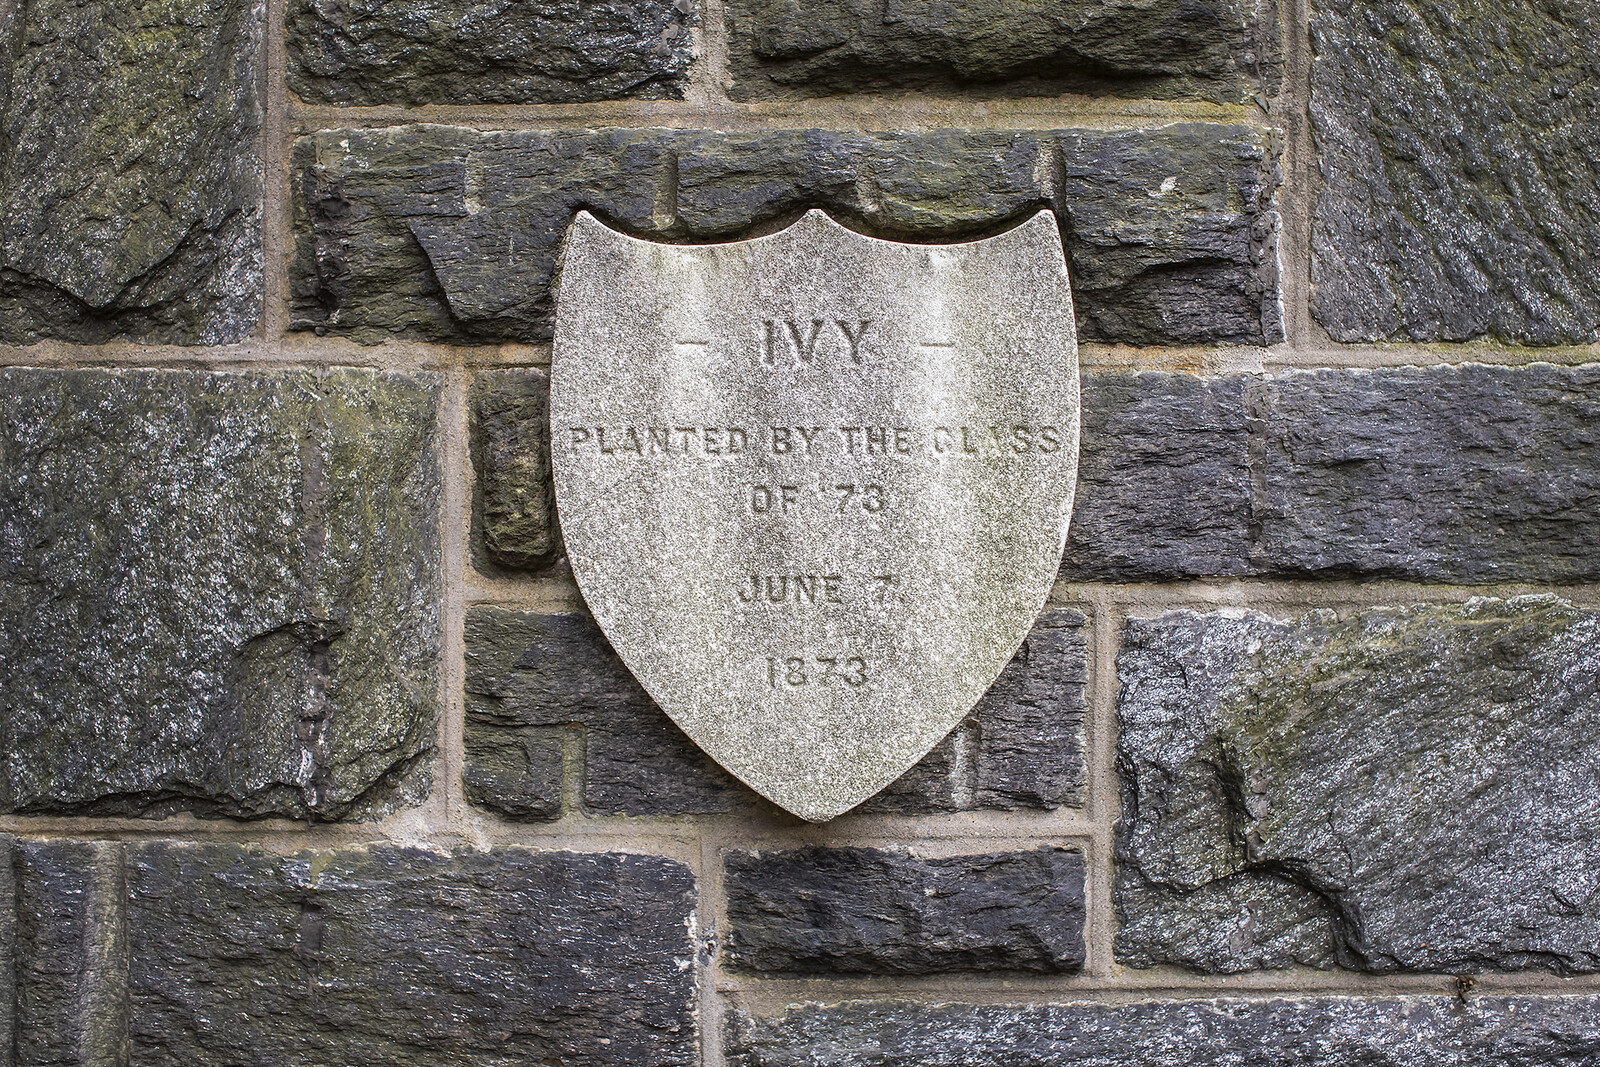 penn's first ivy stone 1873